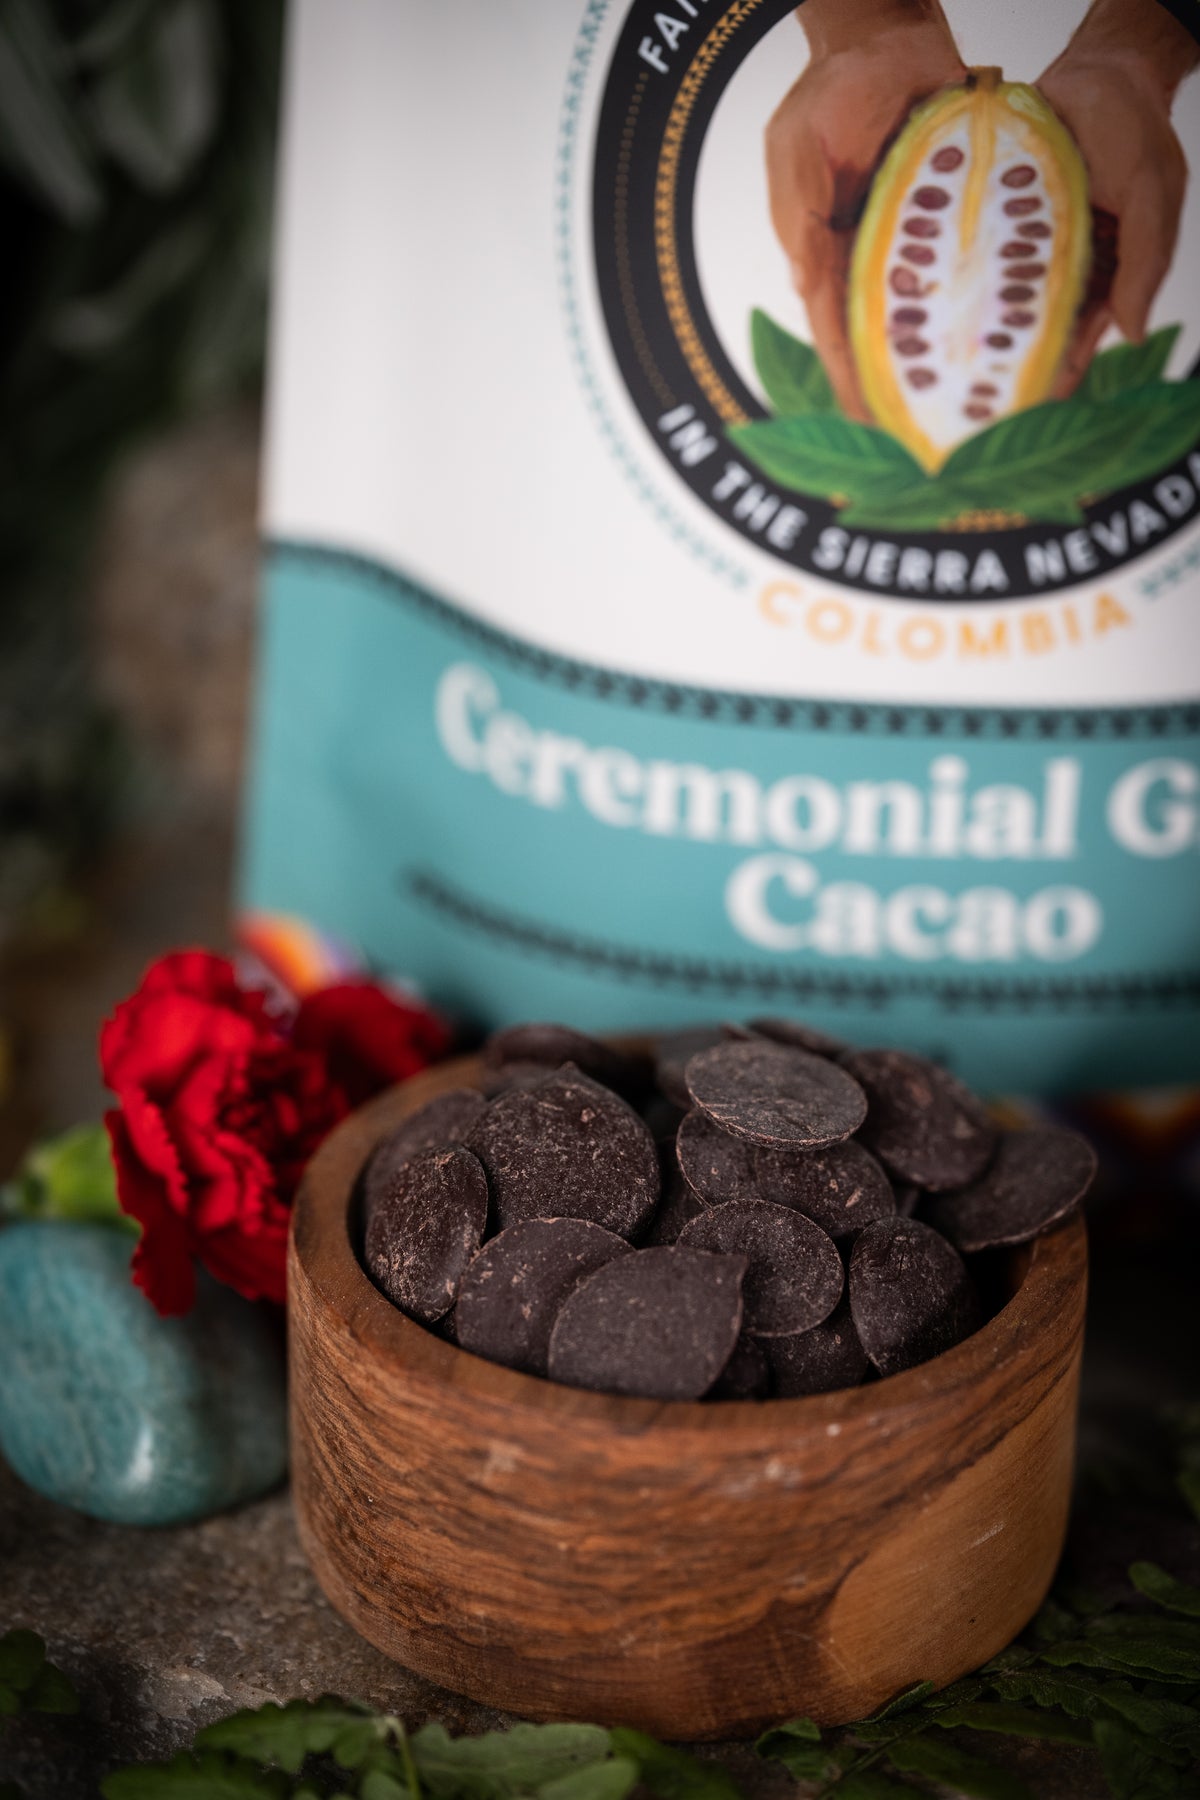 Colombian Ceremonial Grade Cacao From the Arhuaco Tribe